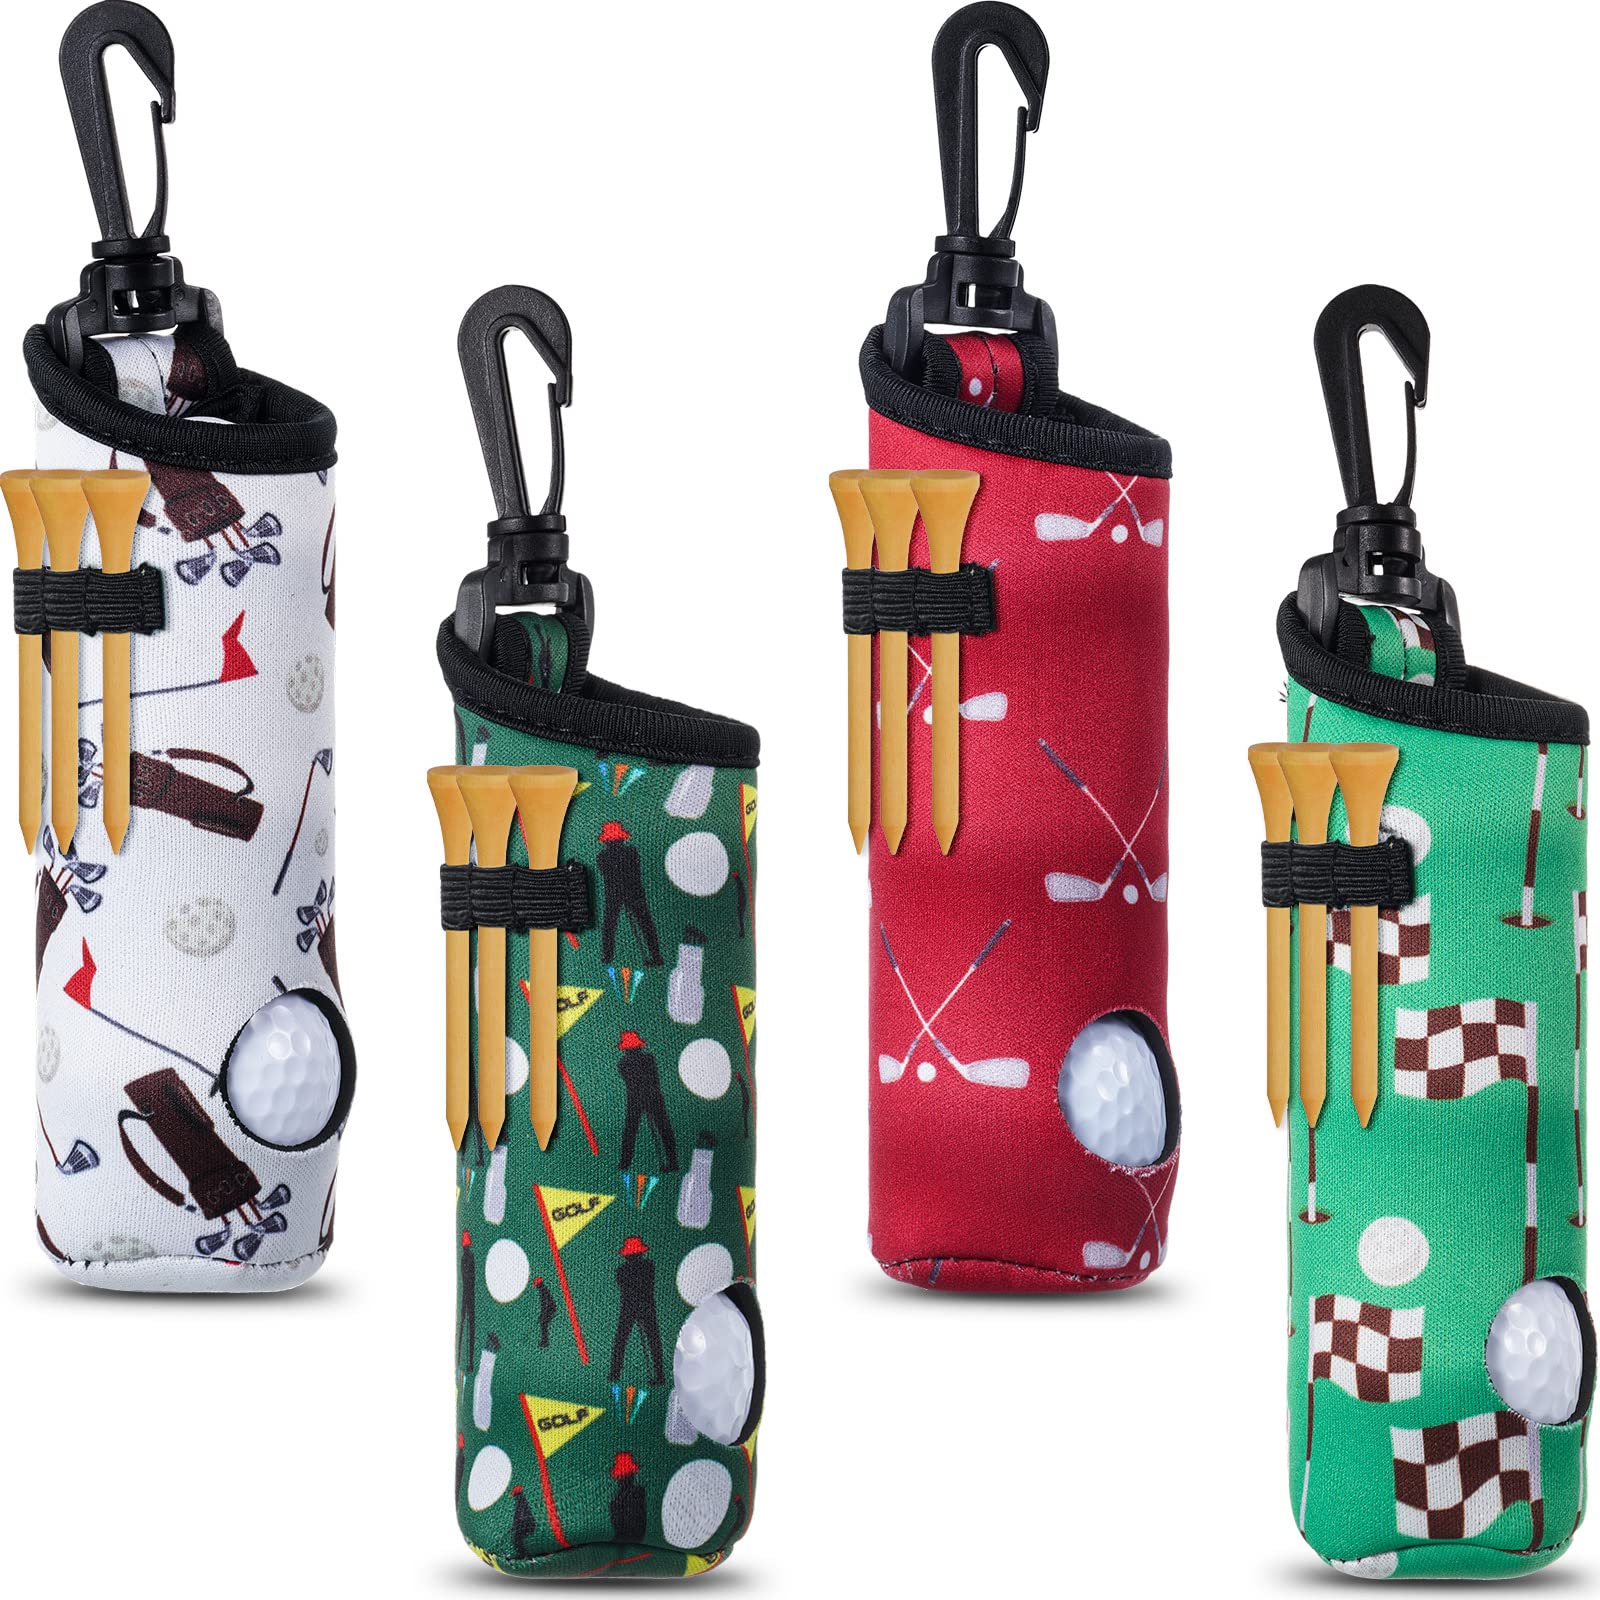 1pc Golf Ball Bag Pouch With 3 Balls, 3 & Mini Waist Pack, For Golf Course  Accessories, Neoprene Material, Available In 2 Colors